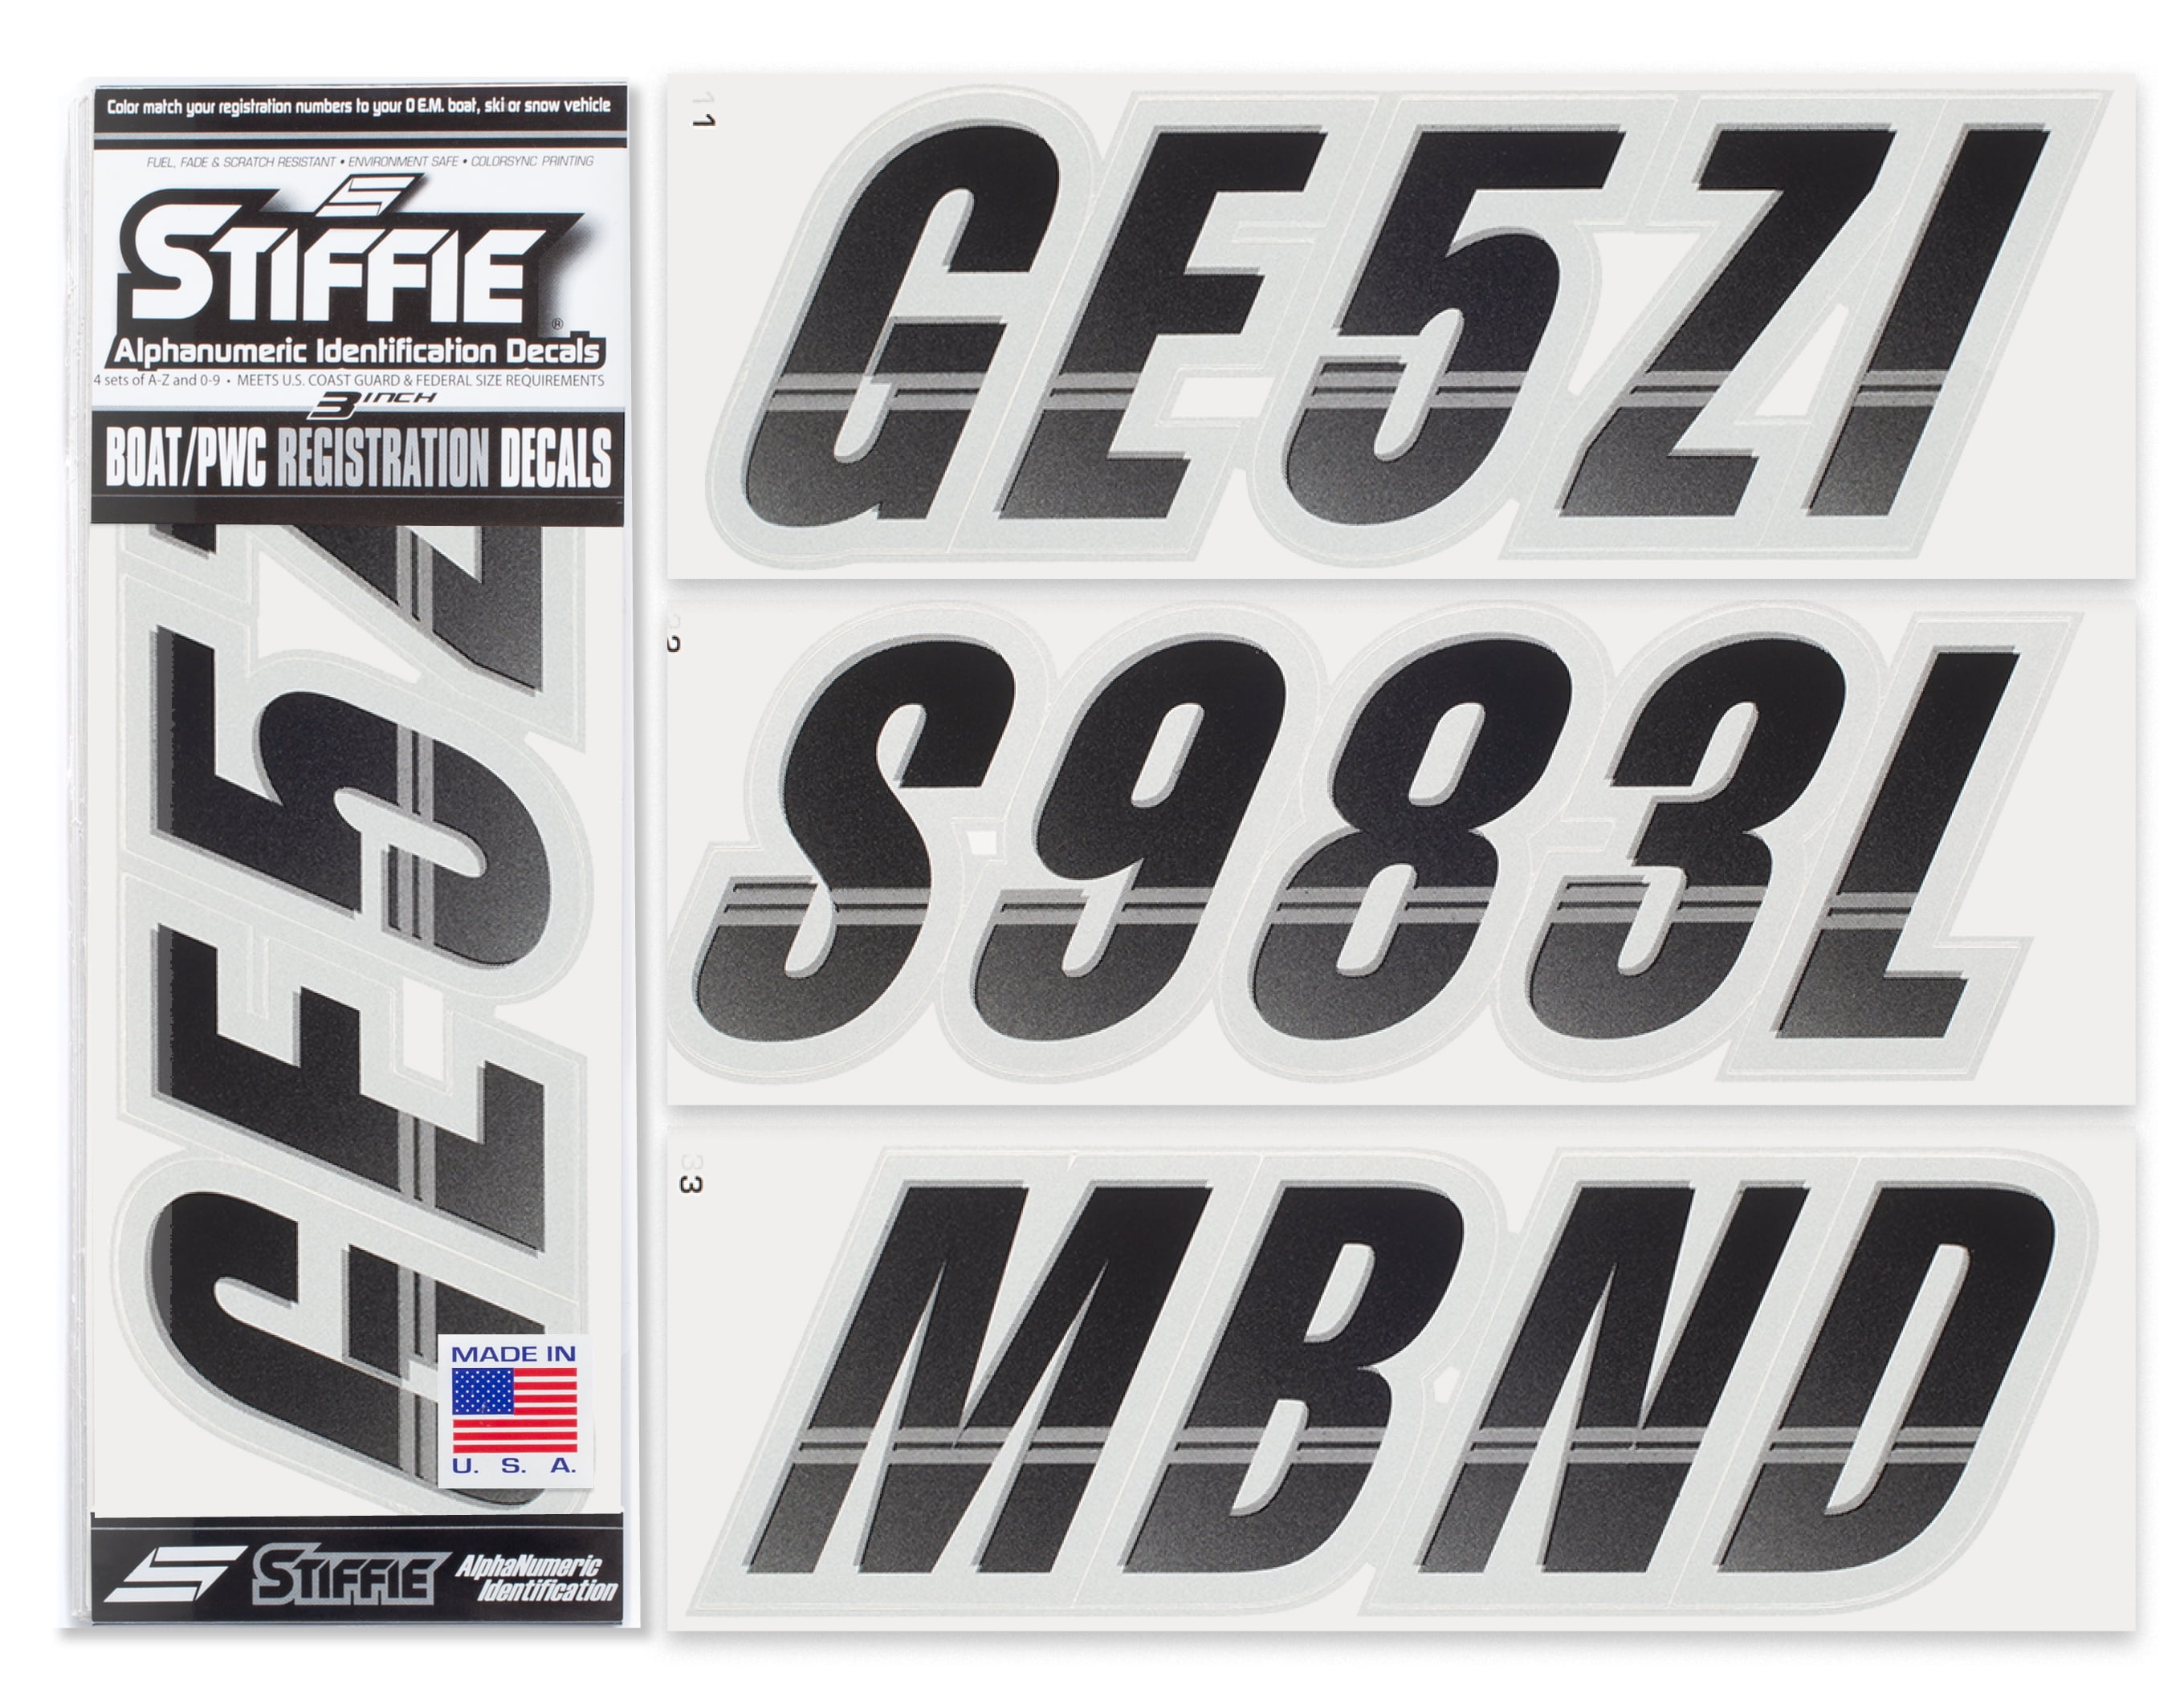 Details about   Hardline 300 Factory Matched 3-Inch Boat PWC Registration Number Kit White 